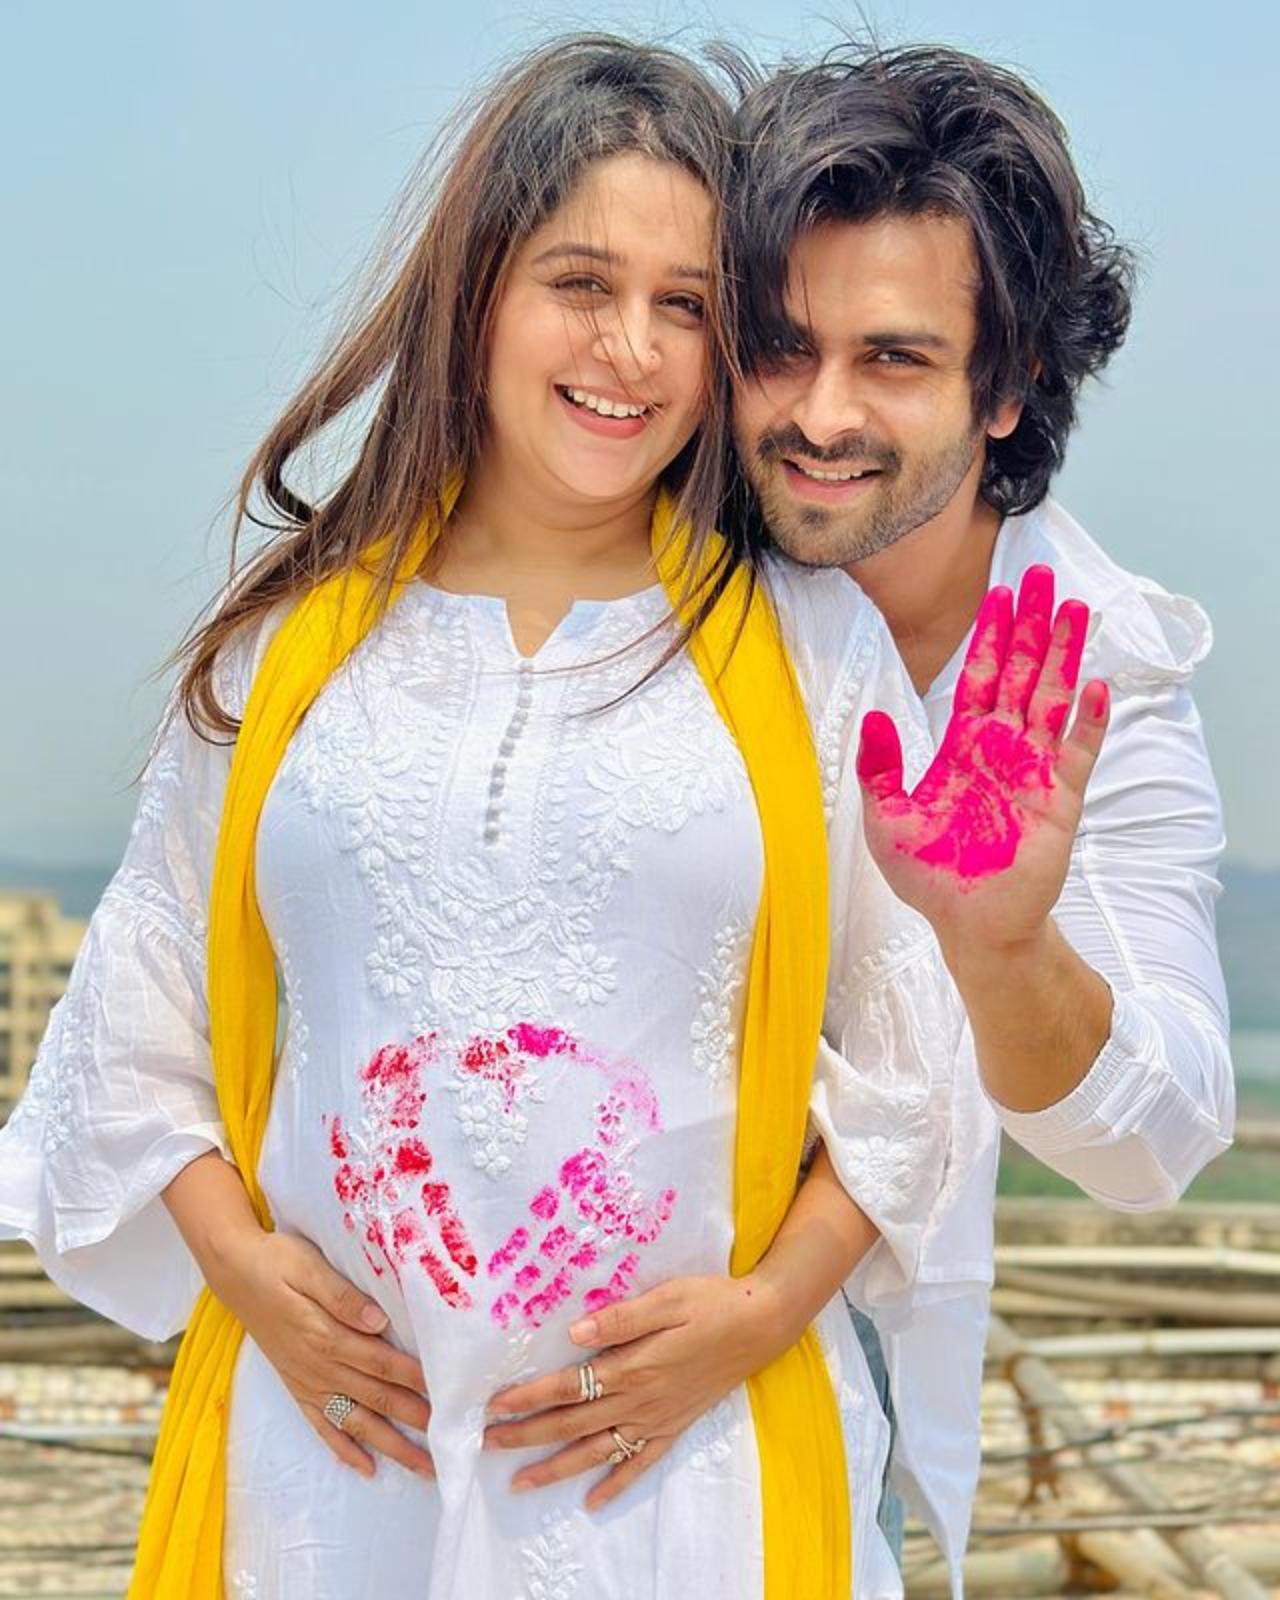 The couple welcomed their first kid, a baby boy, on June 21, 2023. Shoaib and Dipika haven't revealed the name of their baby yet